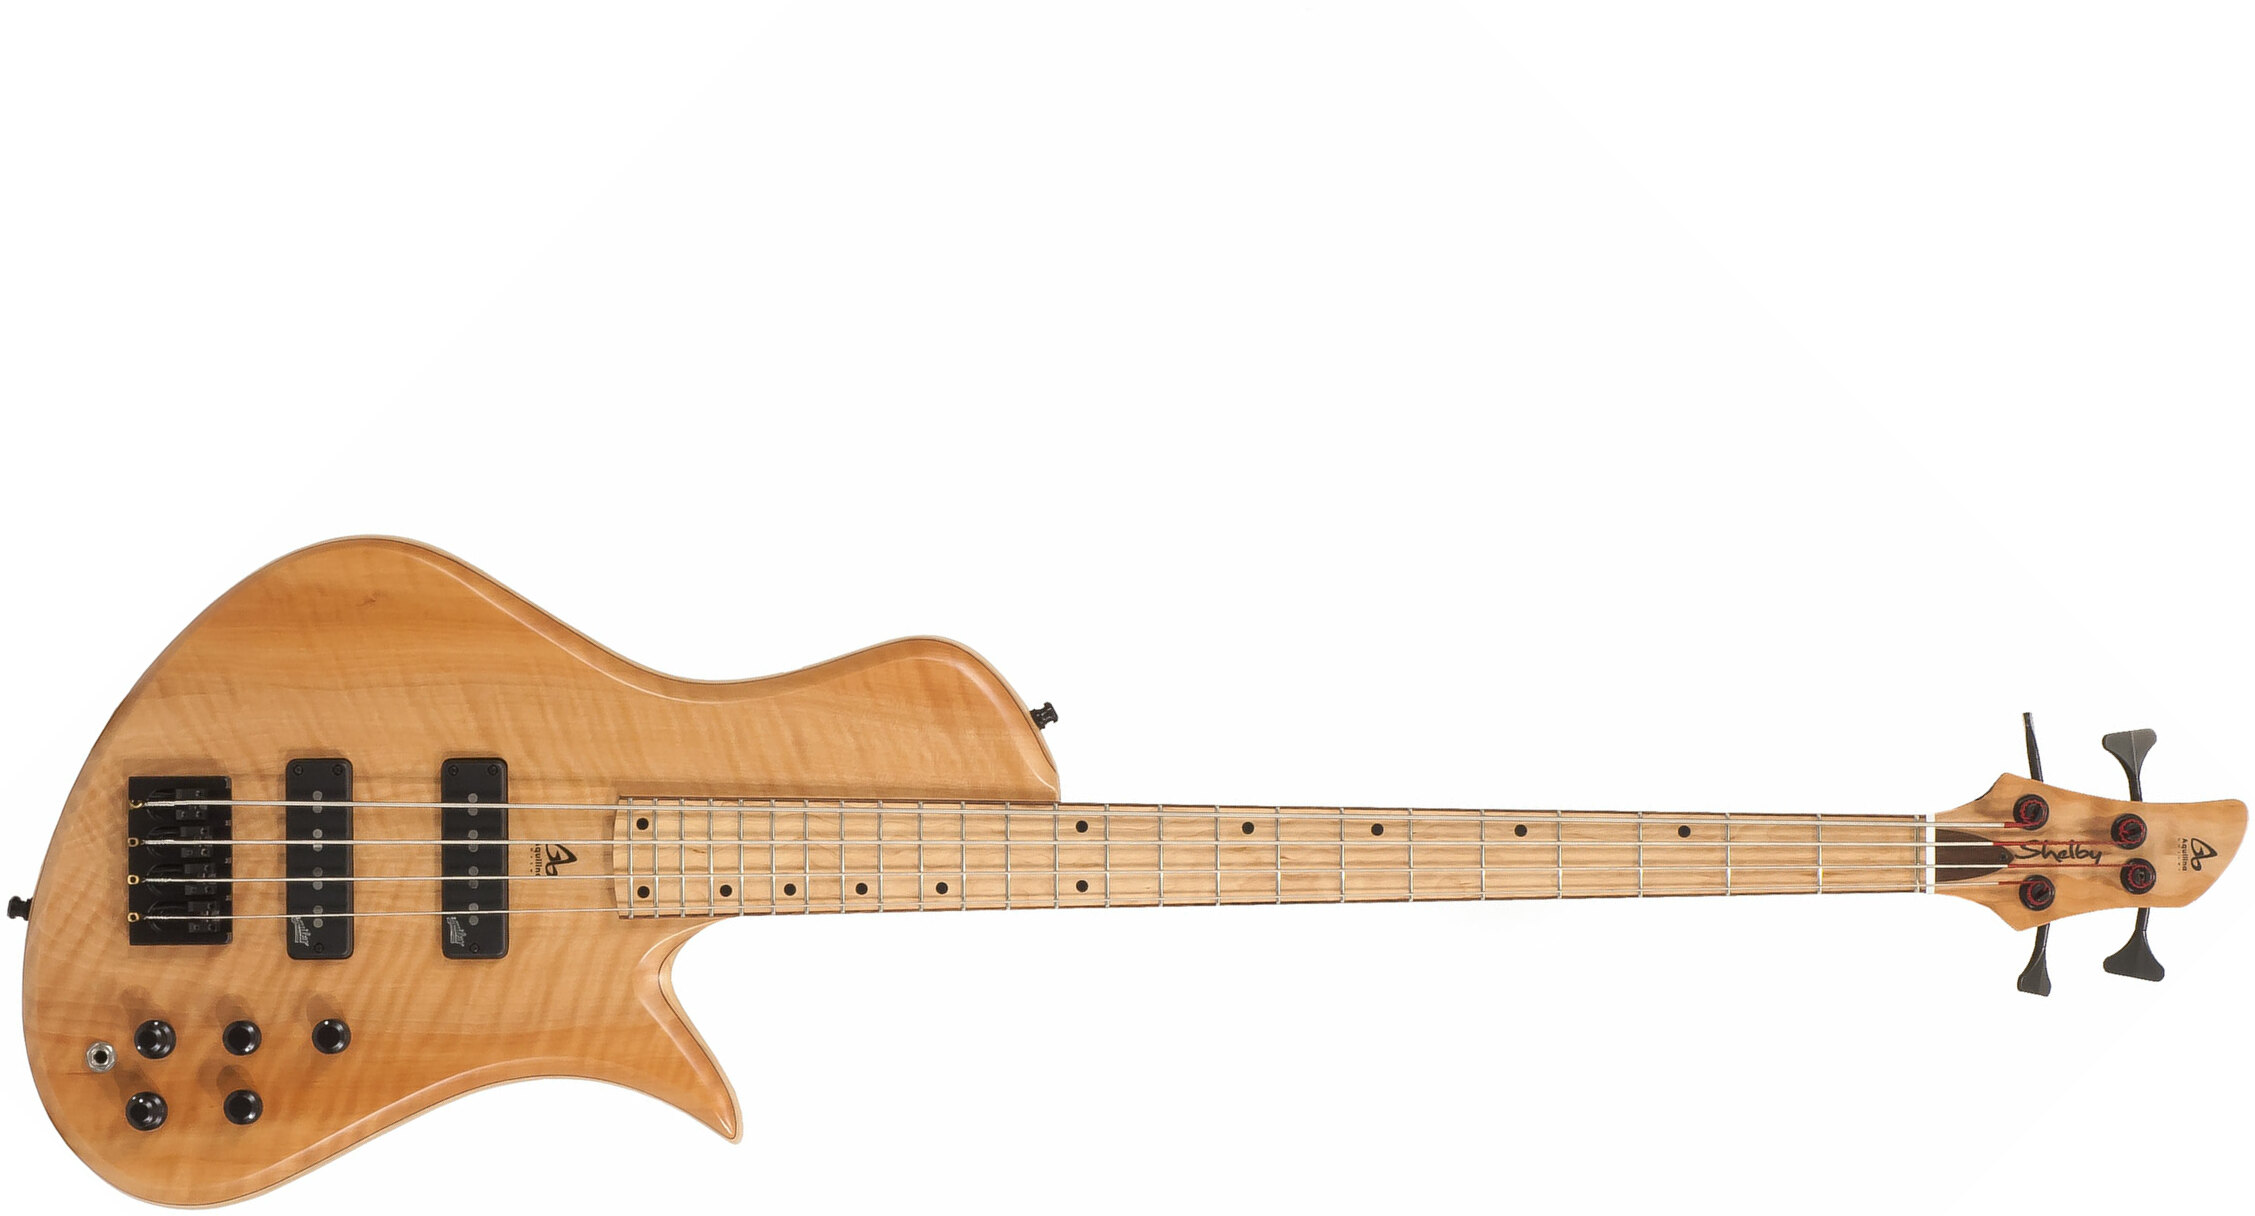 Aquilina Shelby 4 Custom Aulne/frene Active J.east Noi #01854 - Natural - Solid body electric bass - Main picture